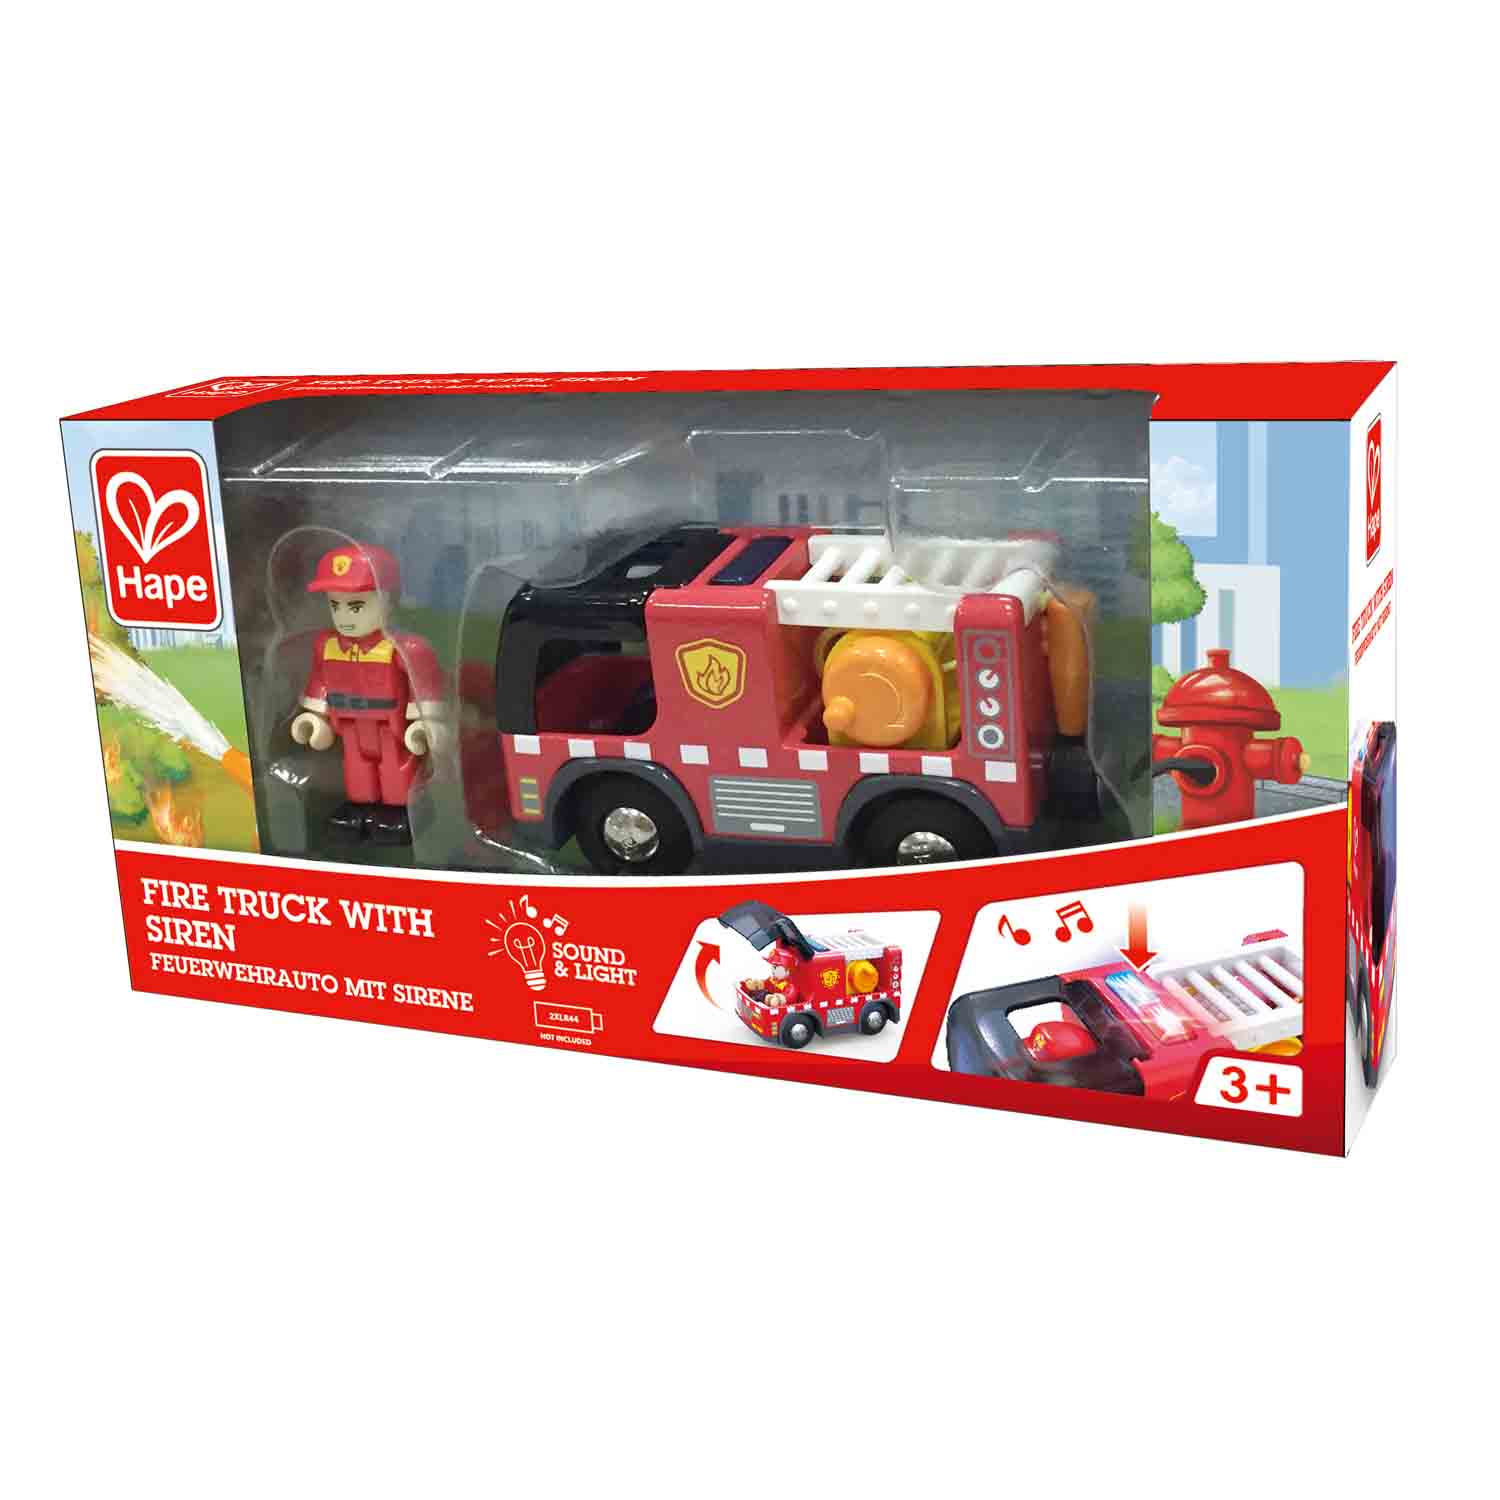 Hape-Fire Truck with Siren-E3737-Legacy Toys